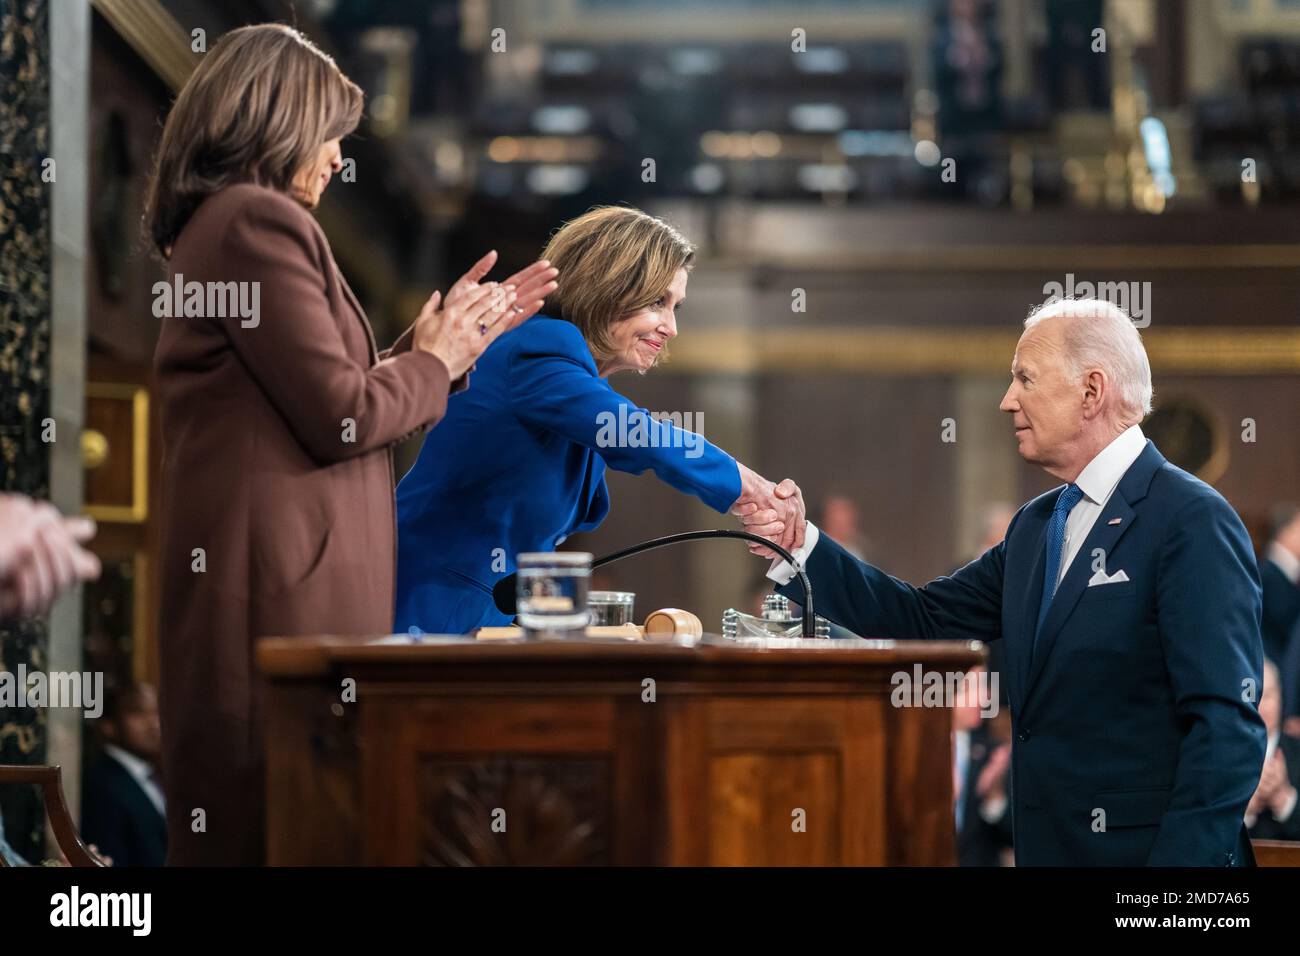 Reportage: President Joe Biden shakes hands with House Speaker Nancy Pelosi after delivering his State of the Union address to a joint session of Congress, Tuesday, March 1, 2022, in the House Chamber at the U.S. Capitol Stock Photo